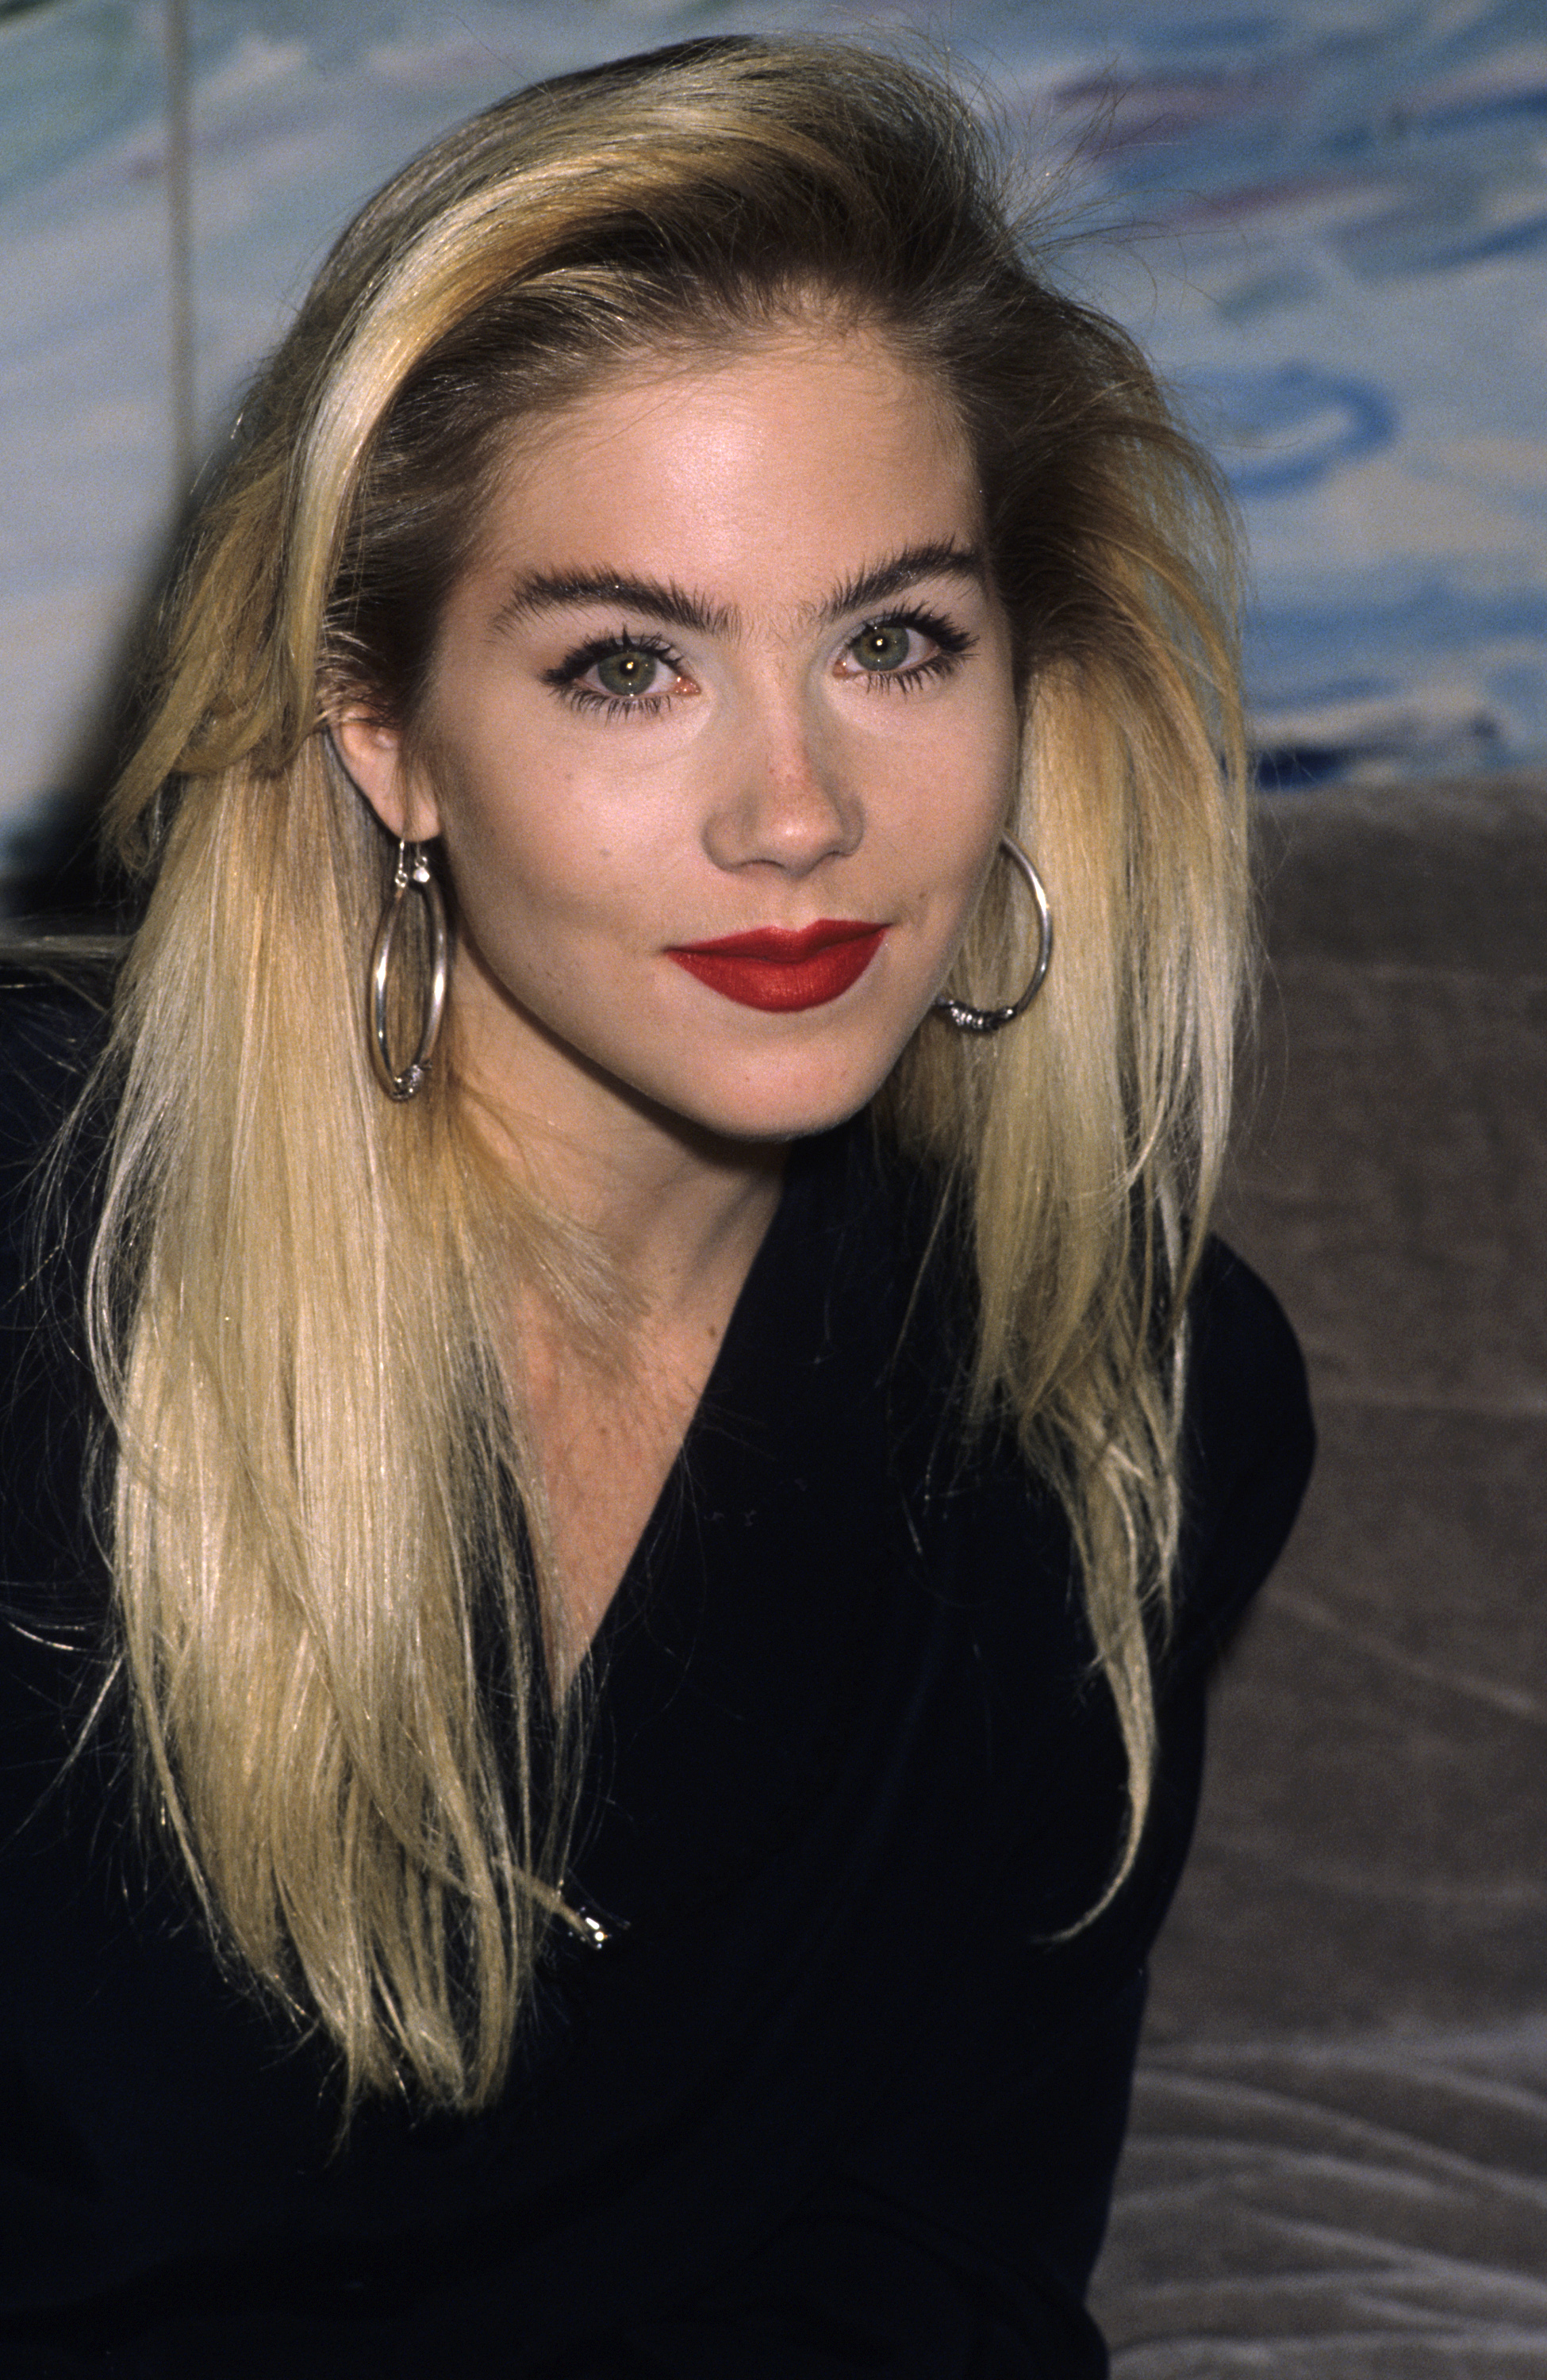 Christina Applegate at the Bash To Launch The Mondrian Models & Photographers Club on November 17, 1988. | Source: Getty Images